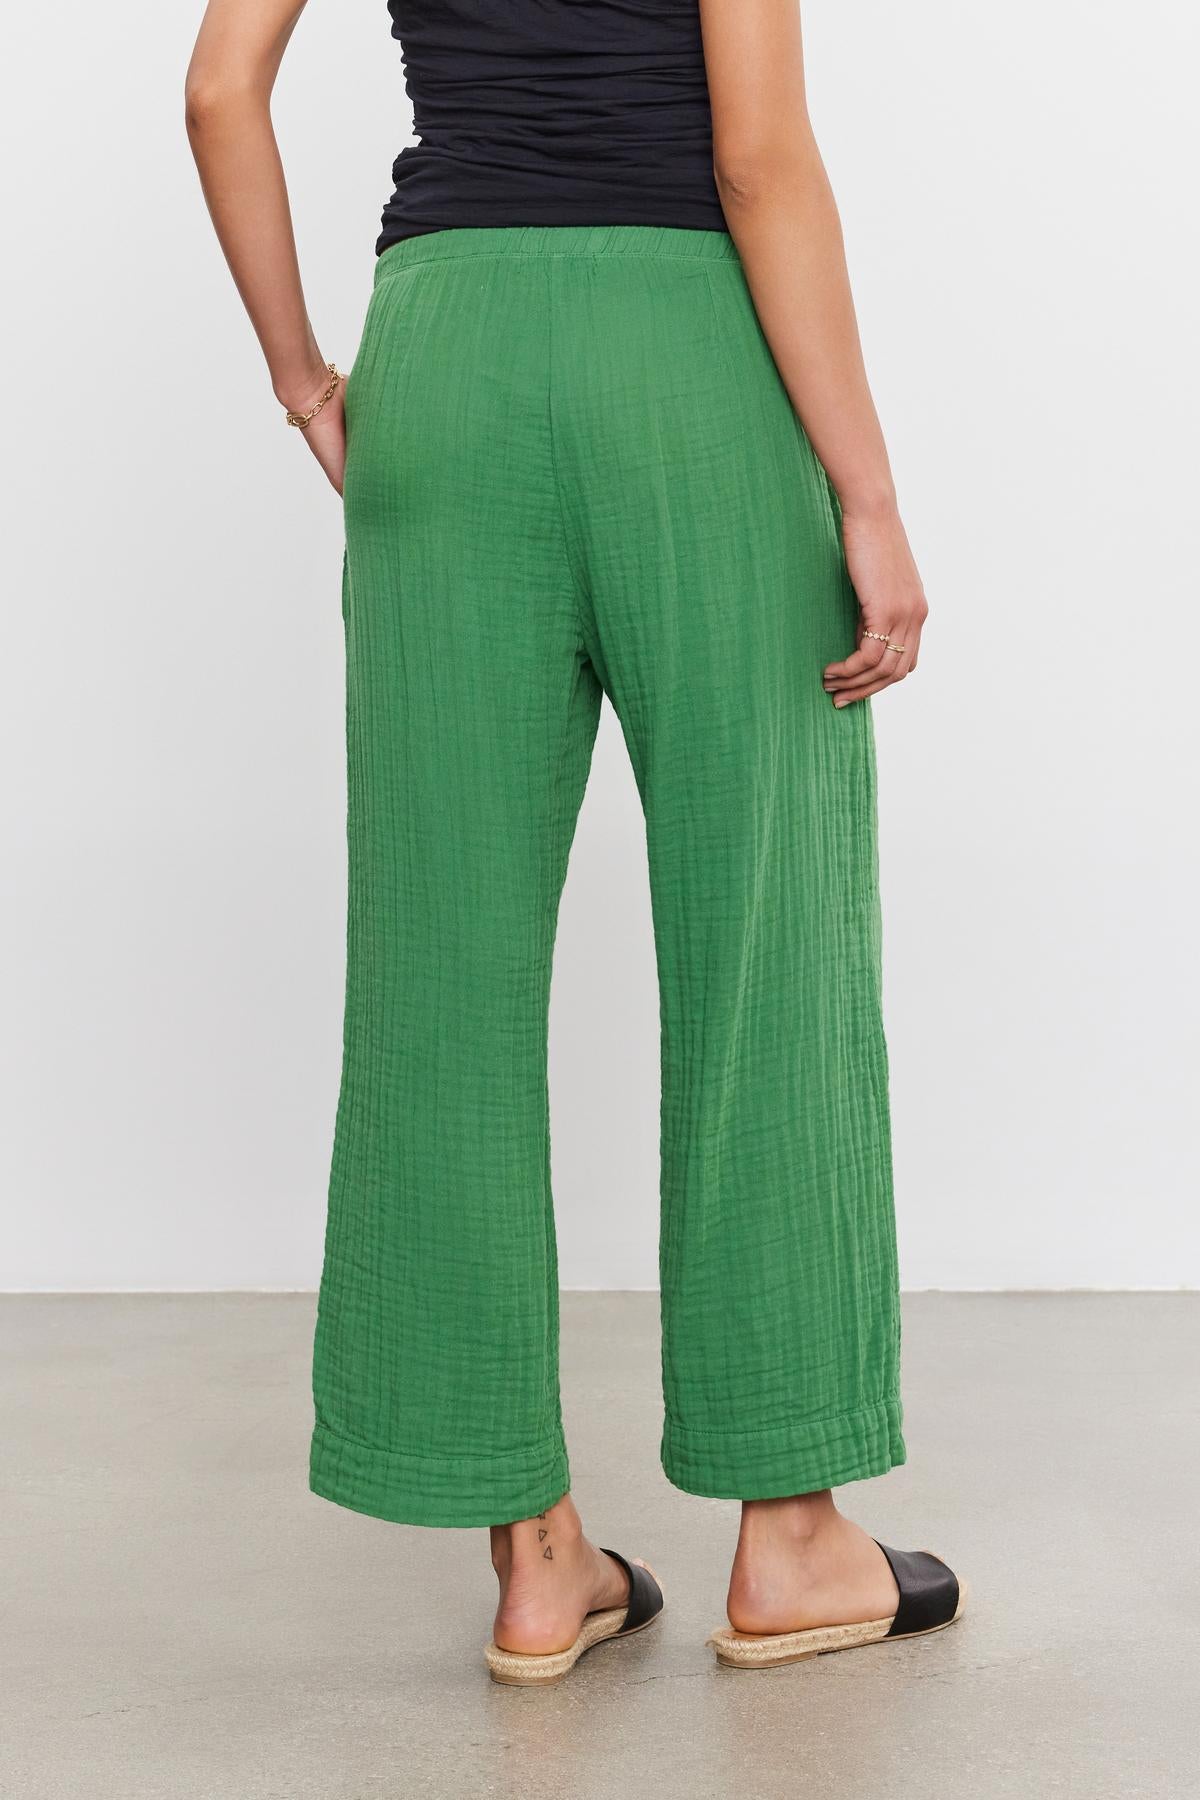   A person standing with their back to the camera, wearing green FRANNY COTTON GAUZE PANTS by Velvet by Graham & Spencer and black flat shoes. 